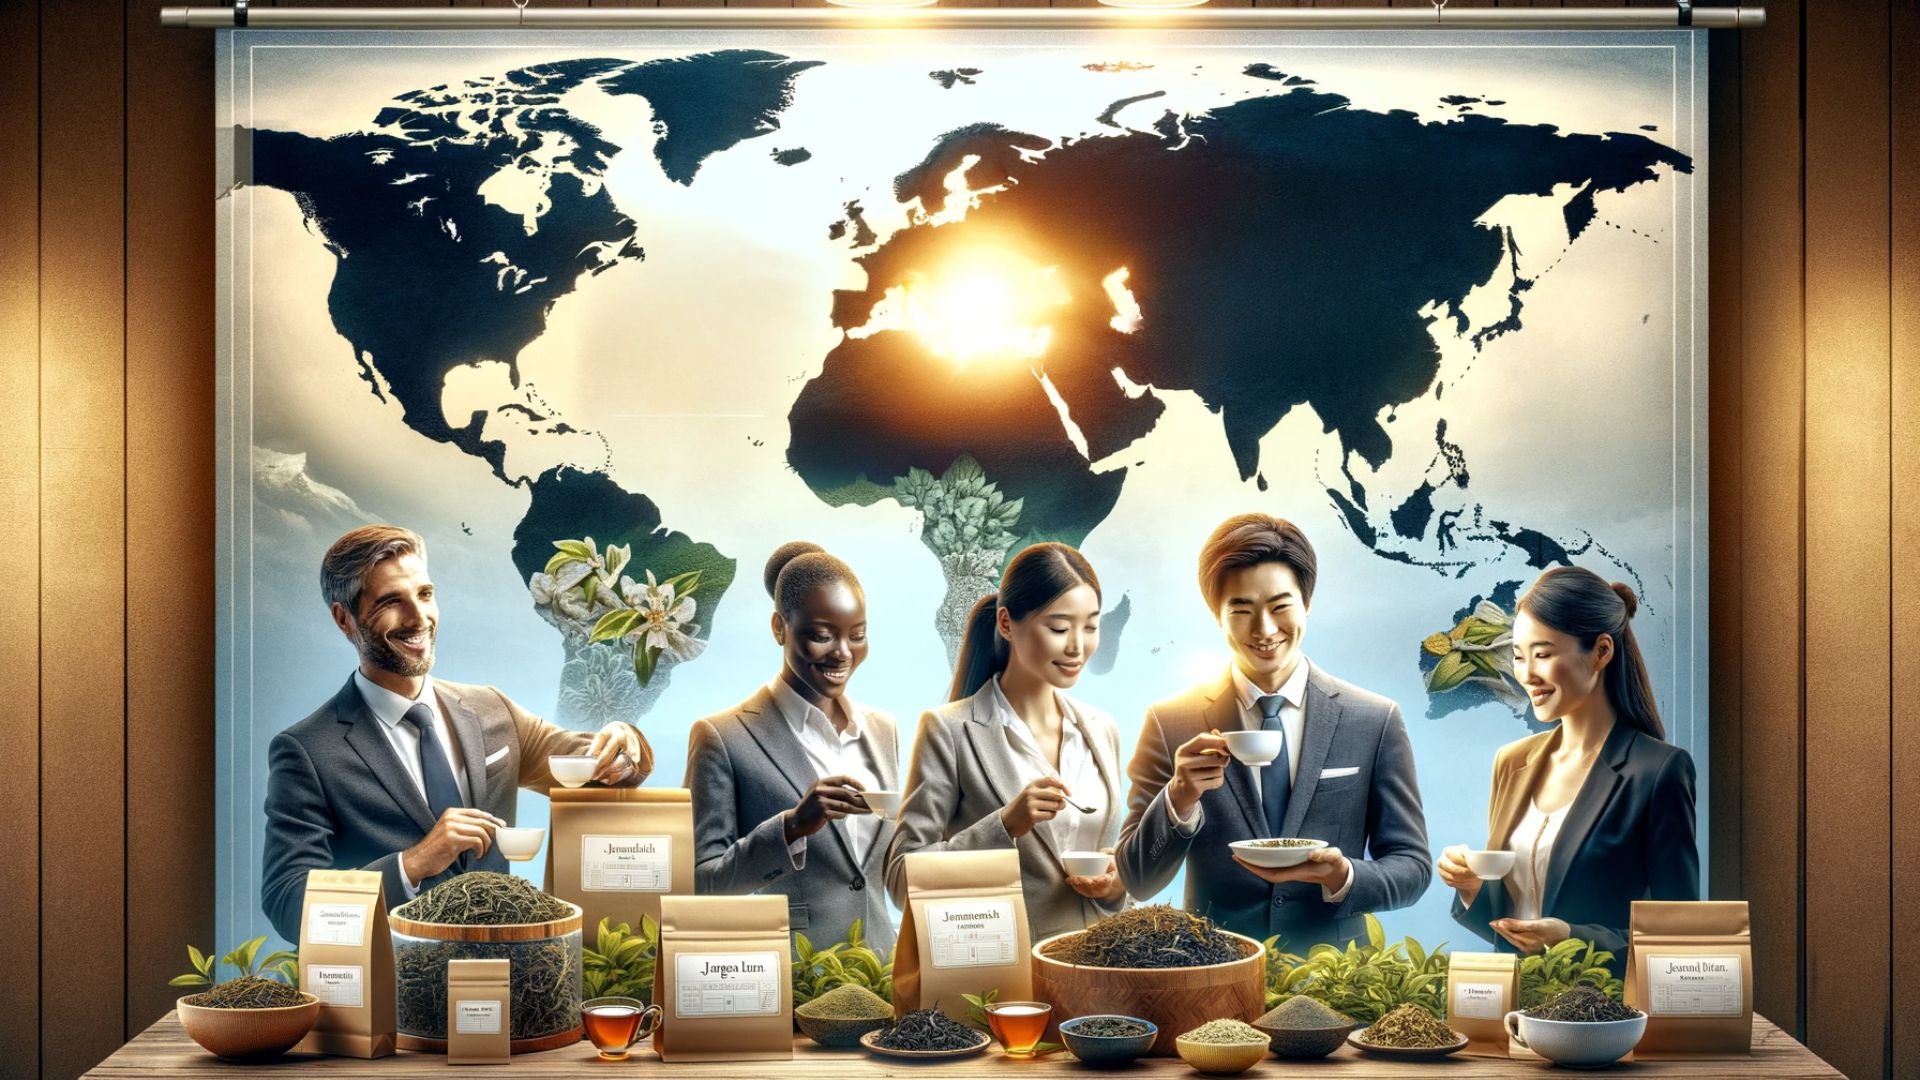 Global tea sourcing service with Japanese tea products and diverse bilingual staff